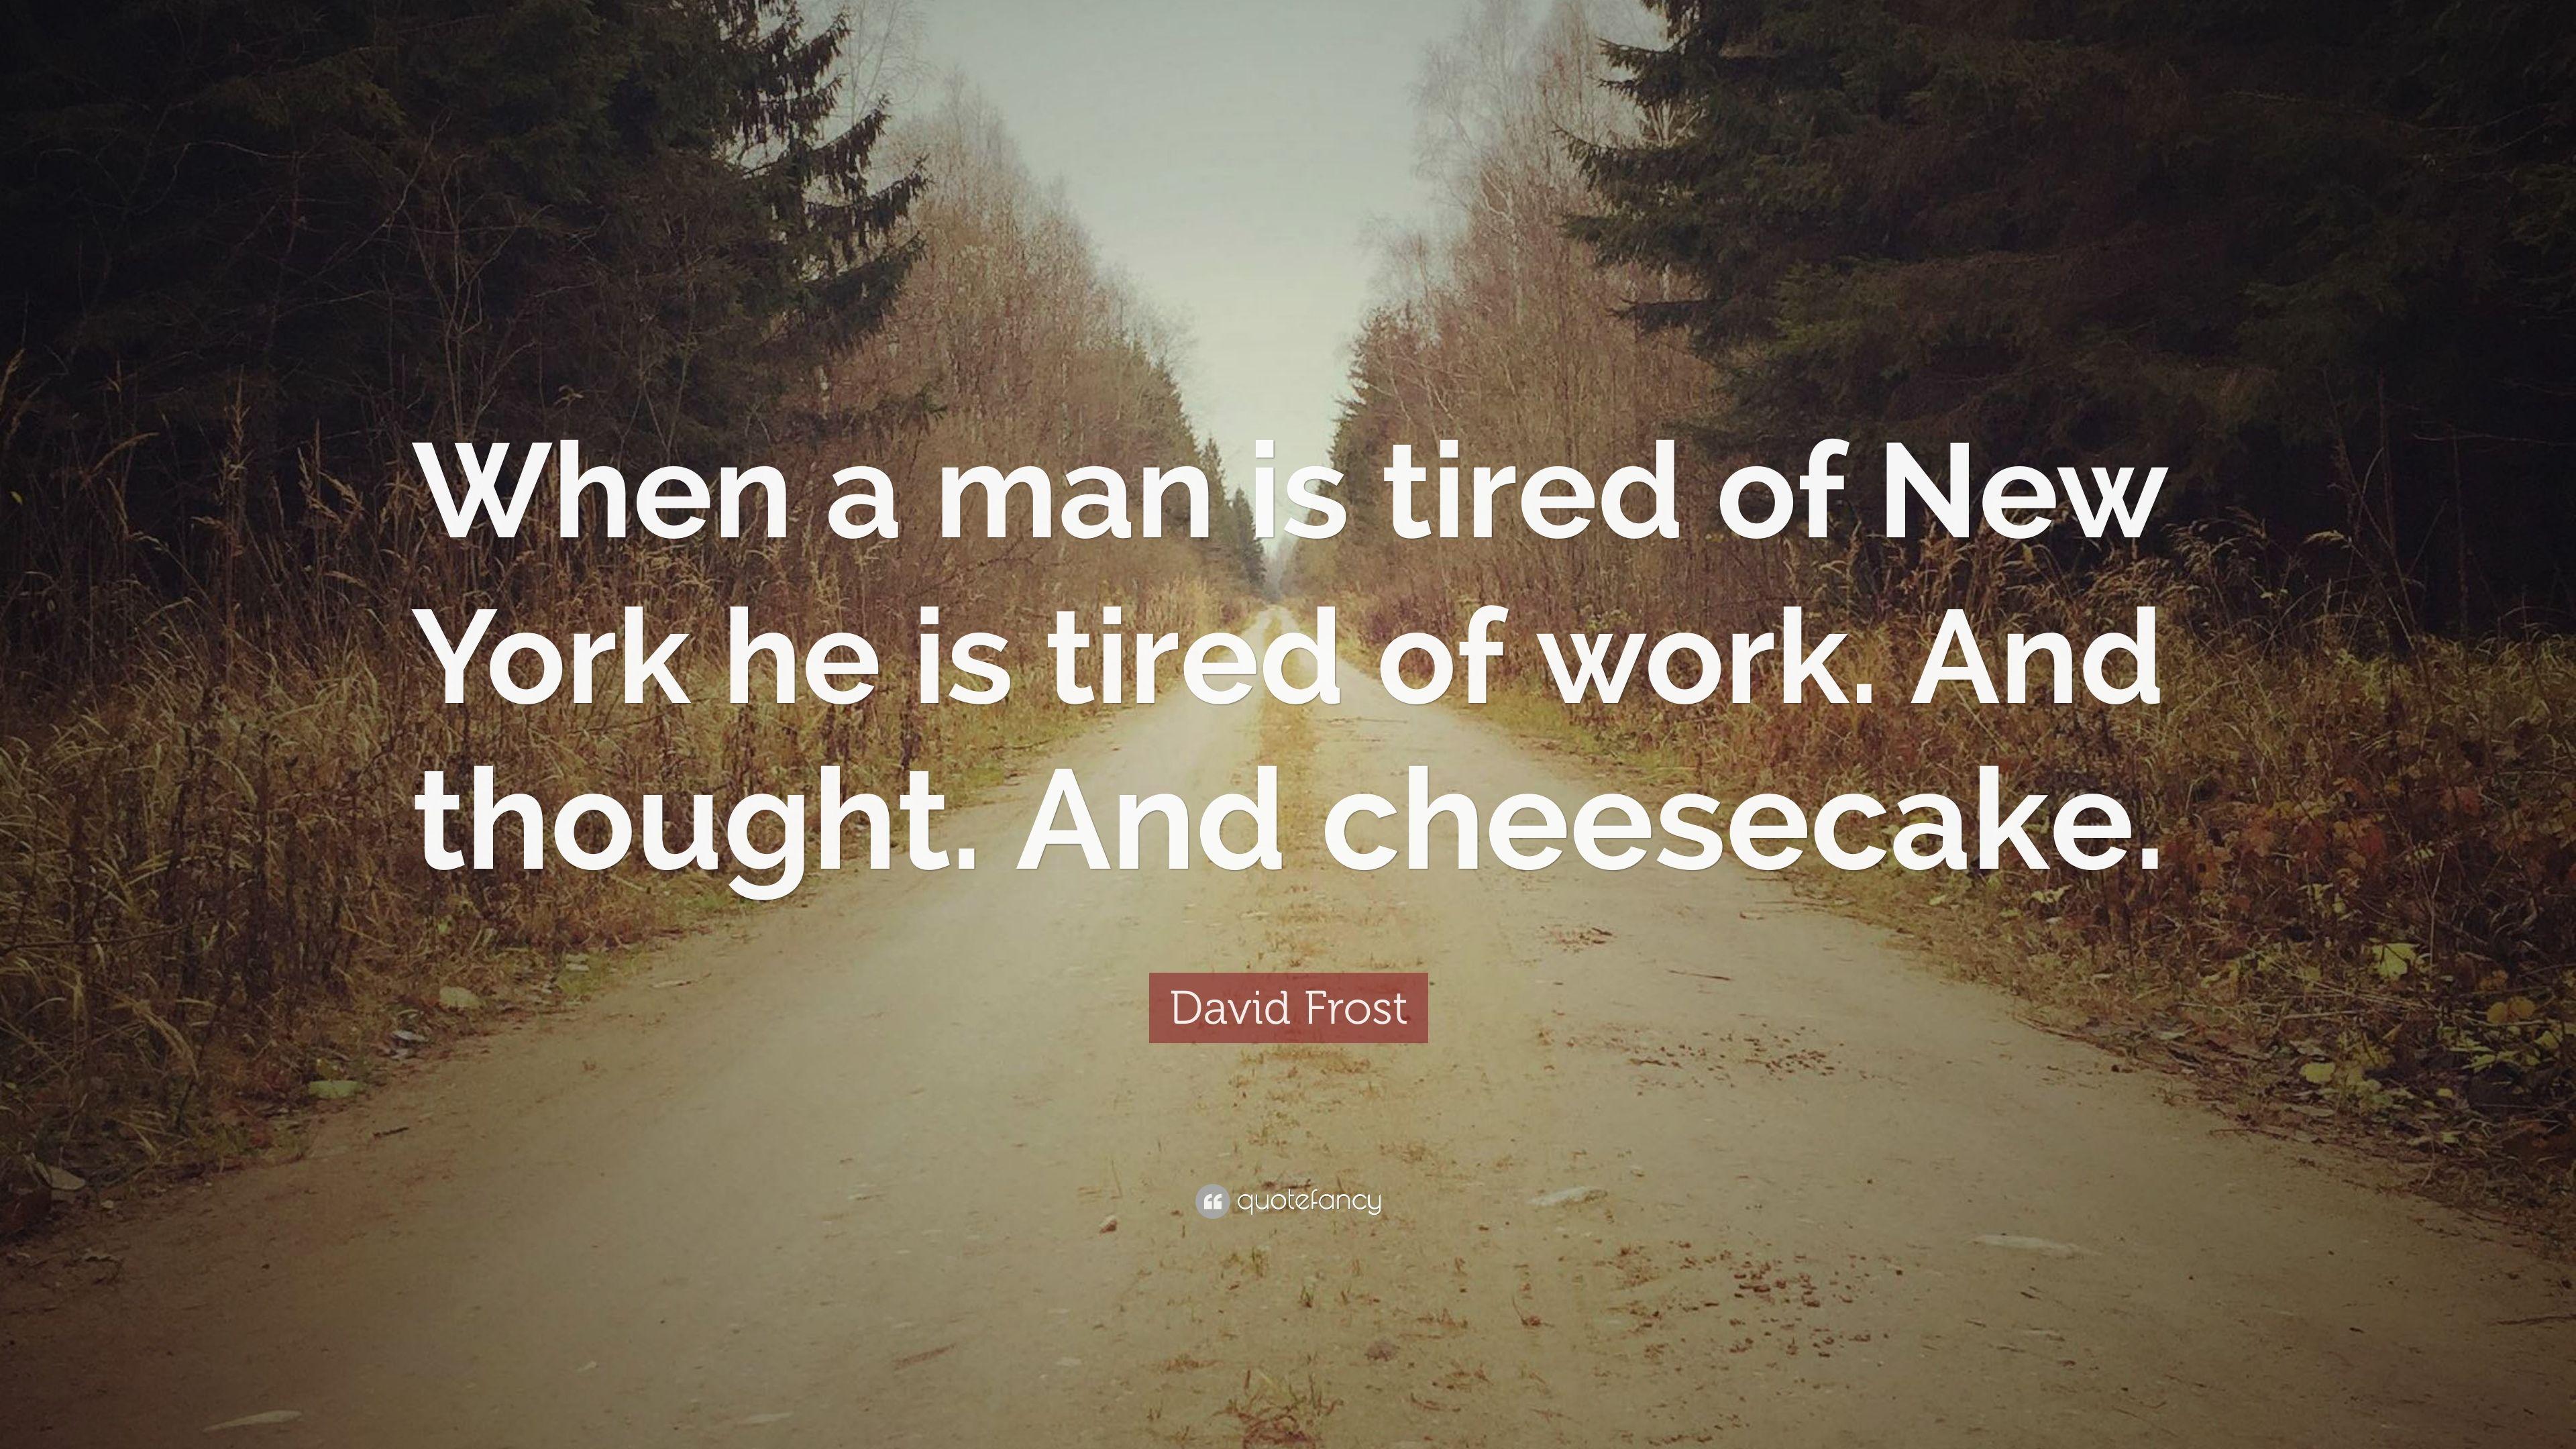 David Frost Quote: “When a man is tired of New York he is tired